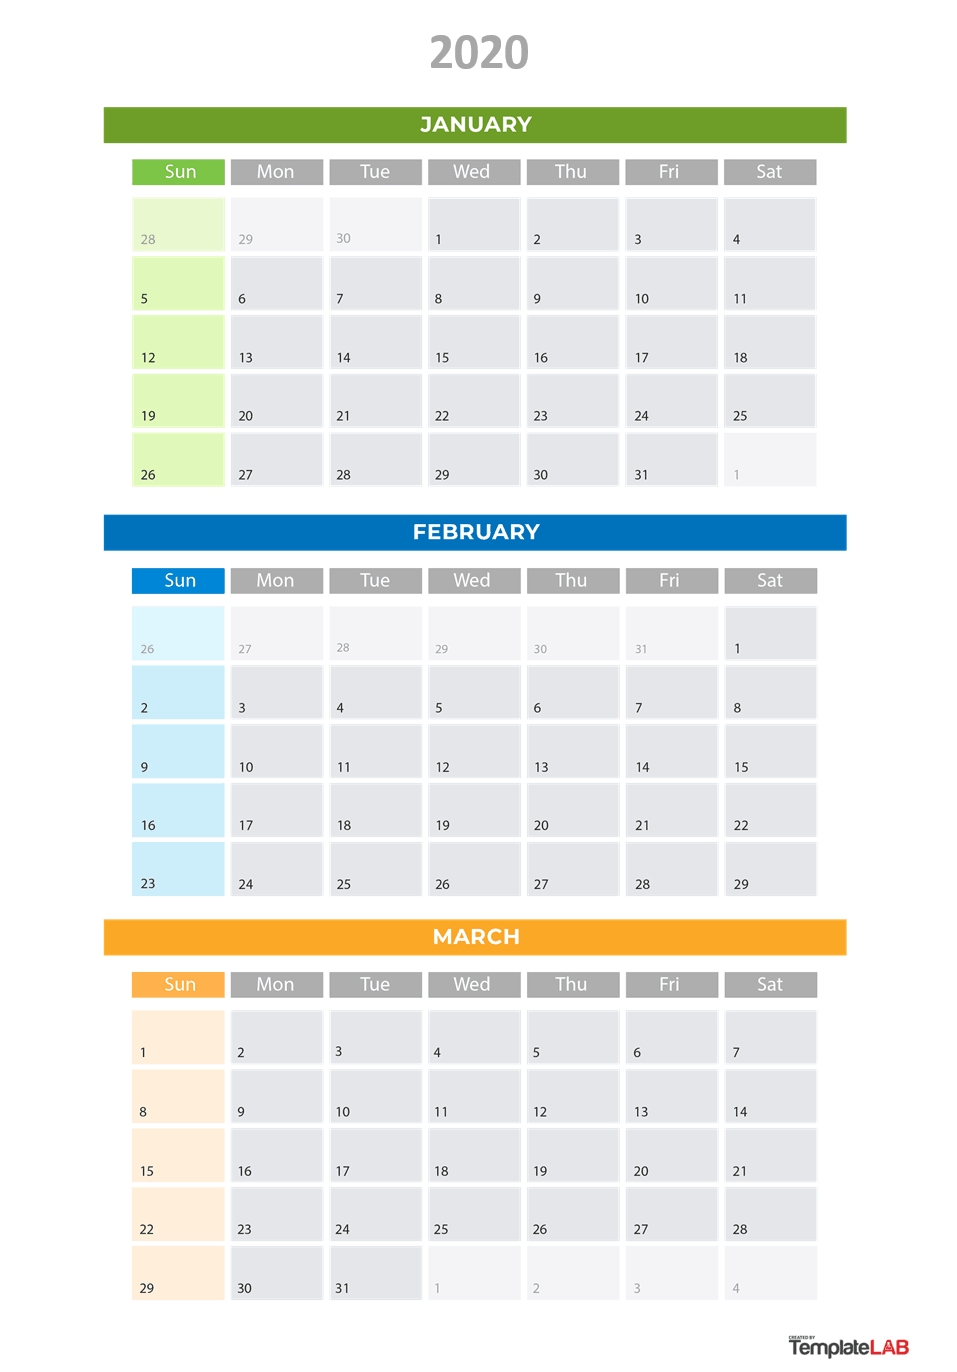 2020 Printable Calendars [Monthly, With Holidays, Yearly] ᐅ Perky Calendar Lab 2020 Printable Calendar